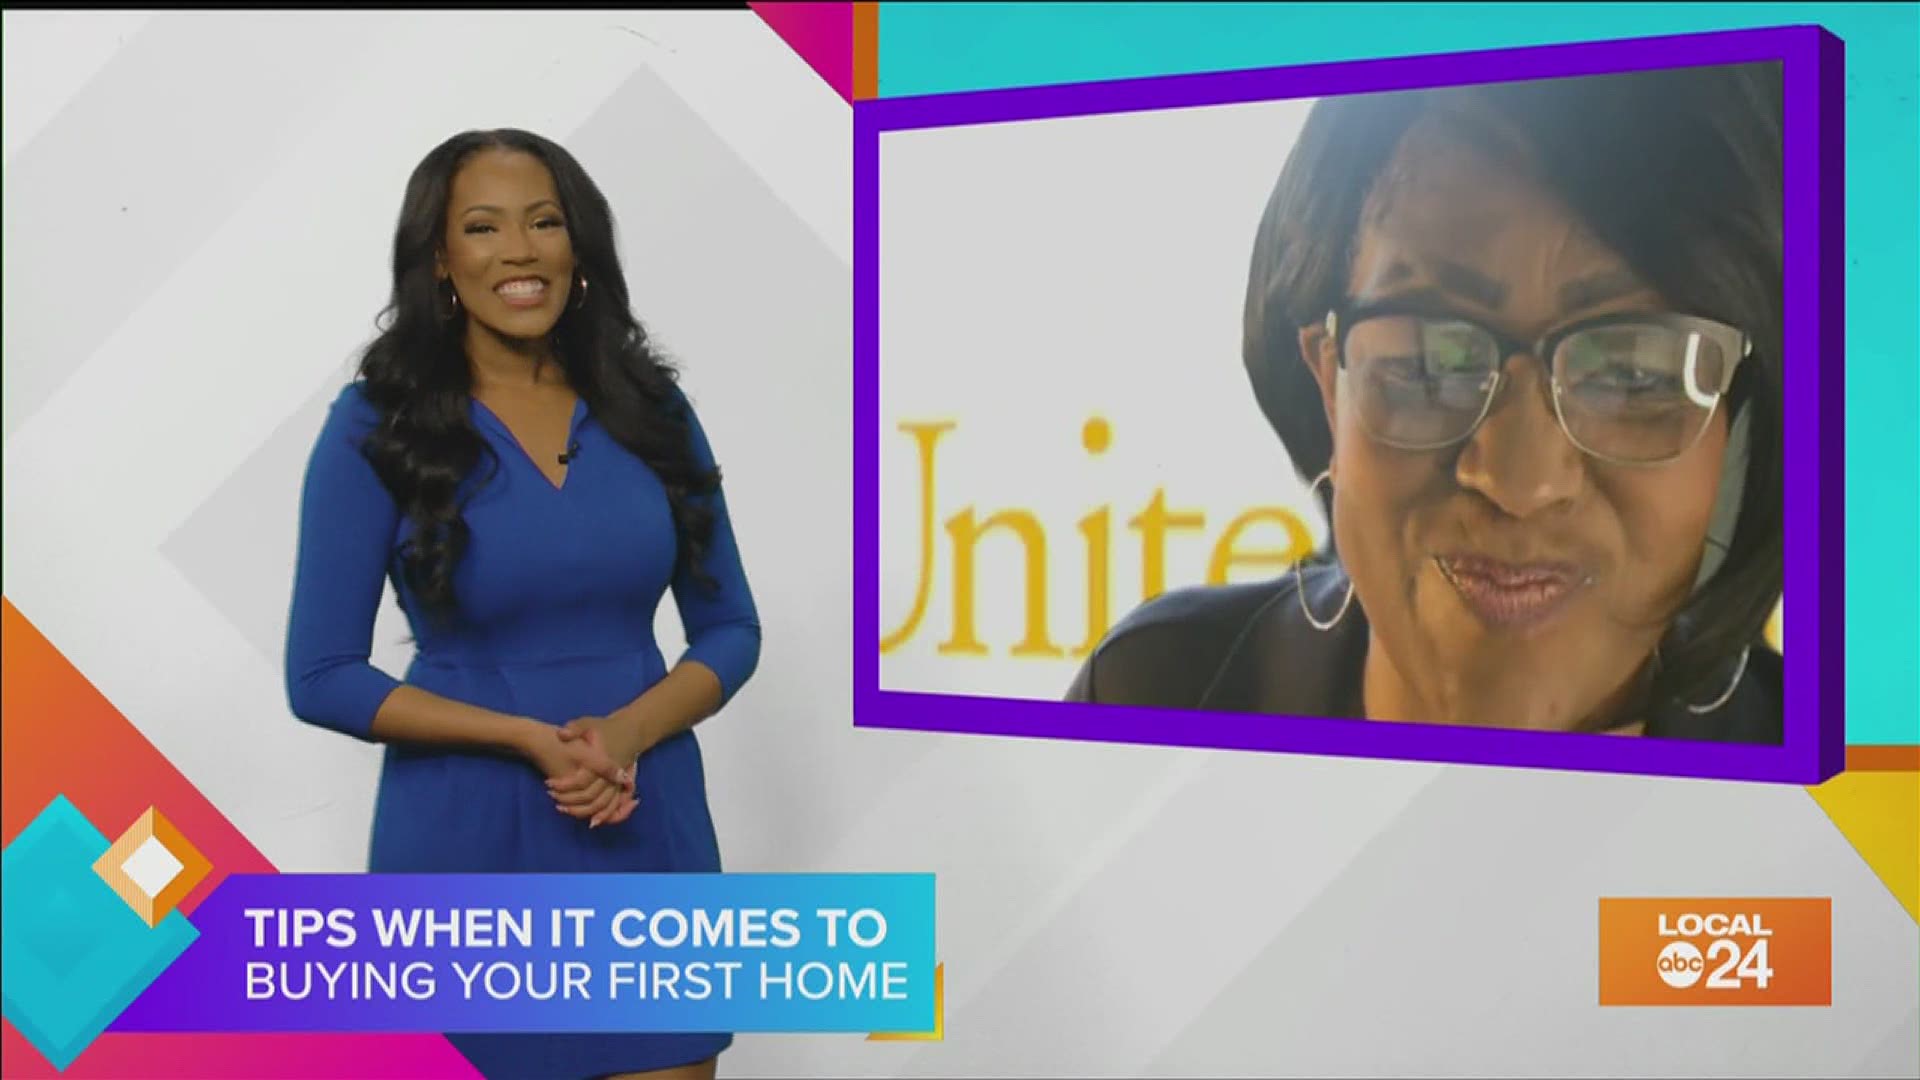 Greetings rising homeowners! Looking to buy a house? Check out these tips from host Sydney Neely and housing counseling and education director Priscilla Reed!